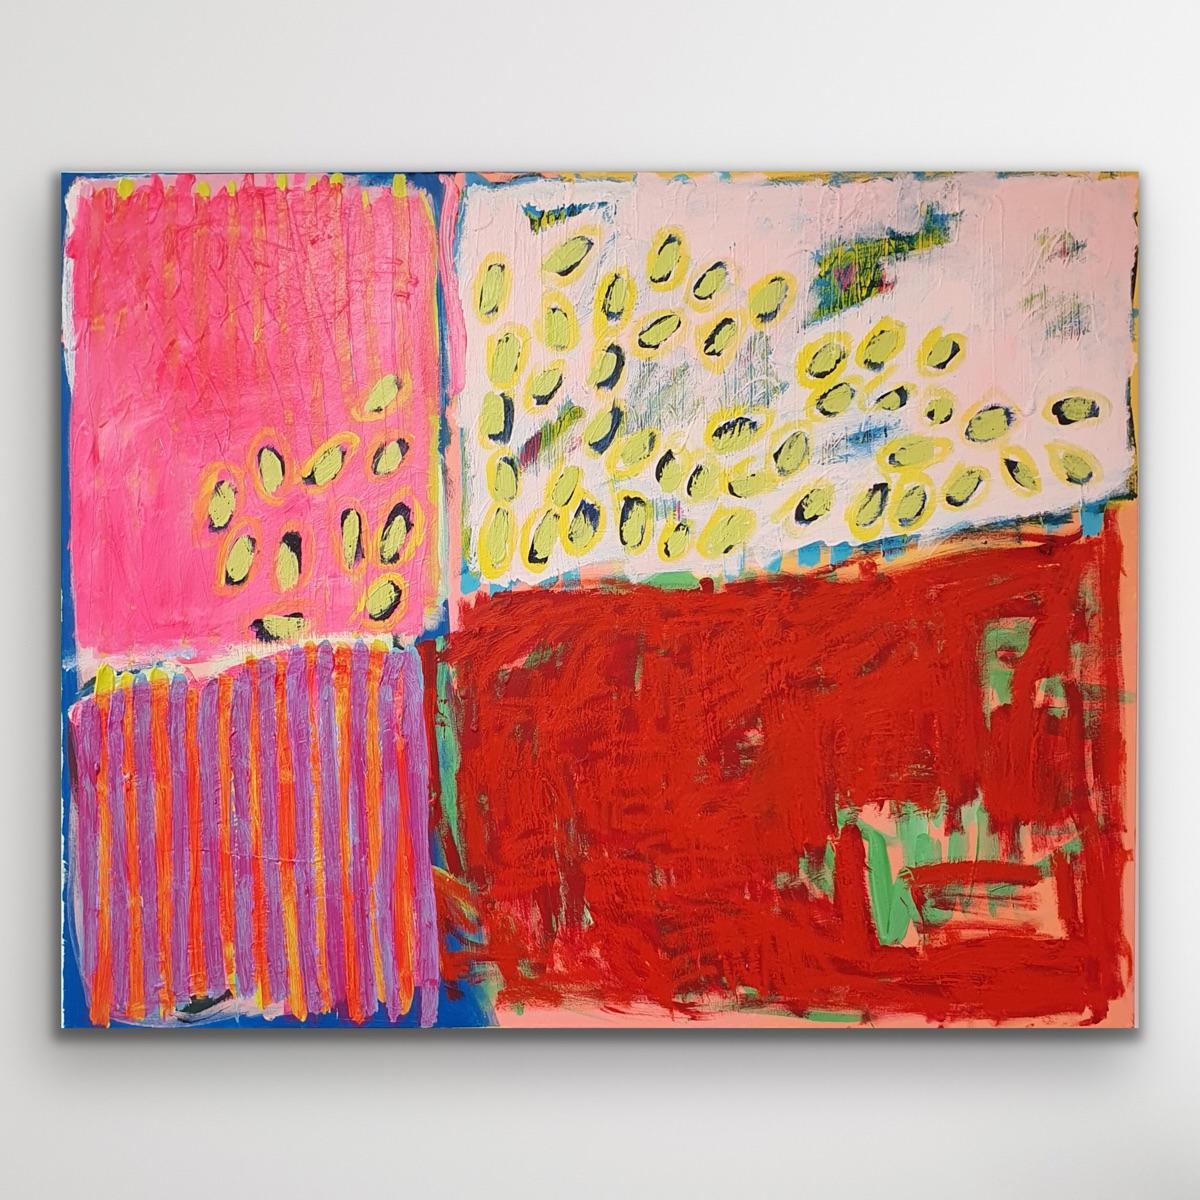 Original abstract painting by artist Jessie Woodward. #576 is an abstract expressionist style painting which would be a statement in any home. 

Discover new works by Jessie Woodward available to buy with Wychwood Art online and in our art gallery.